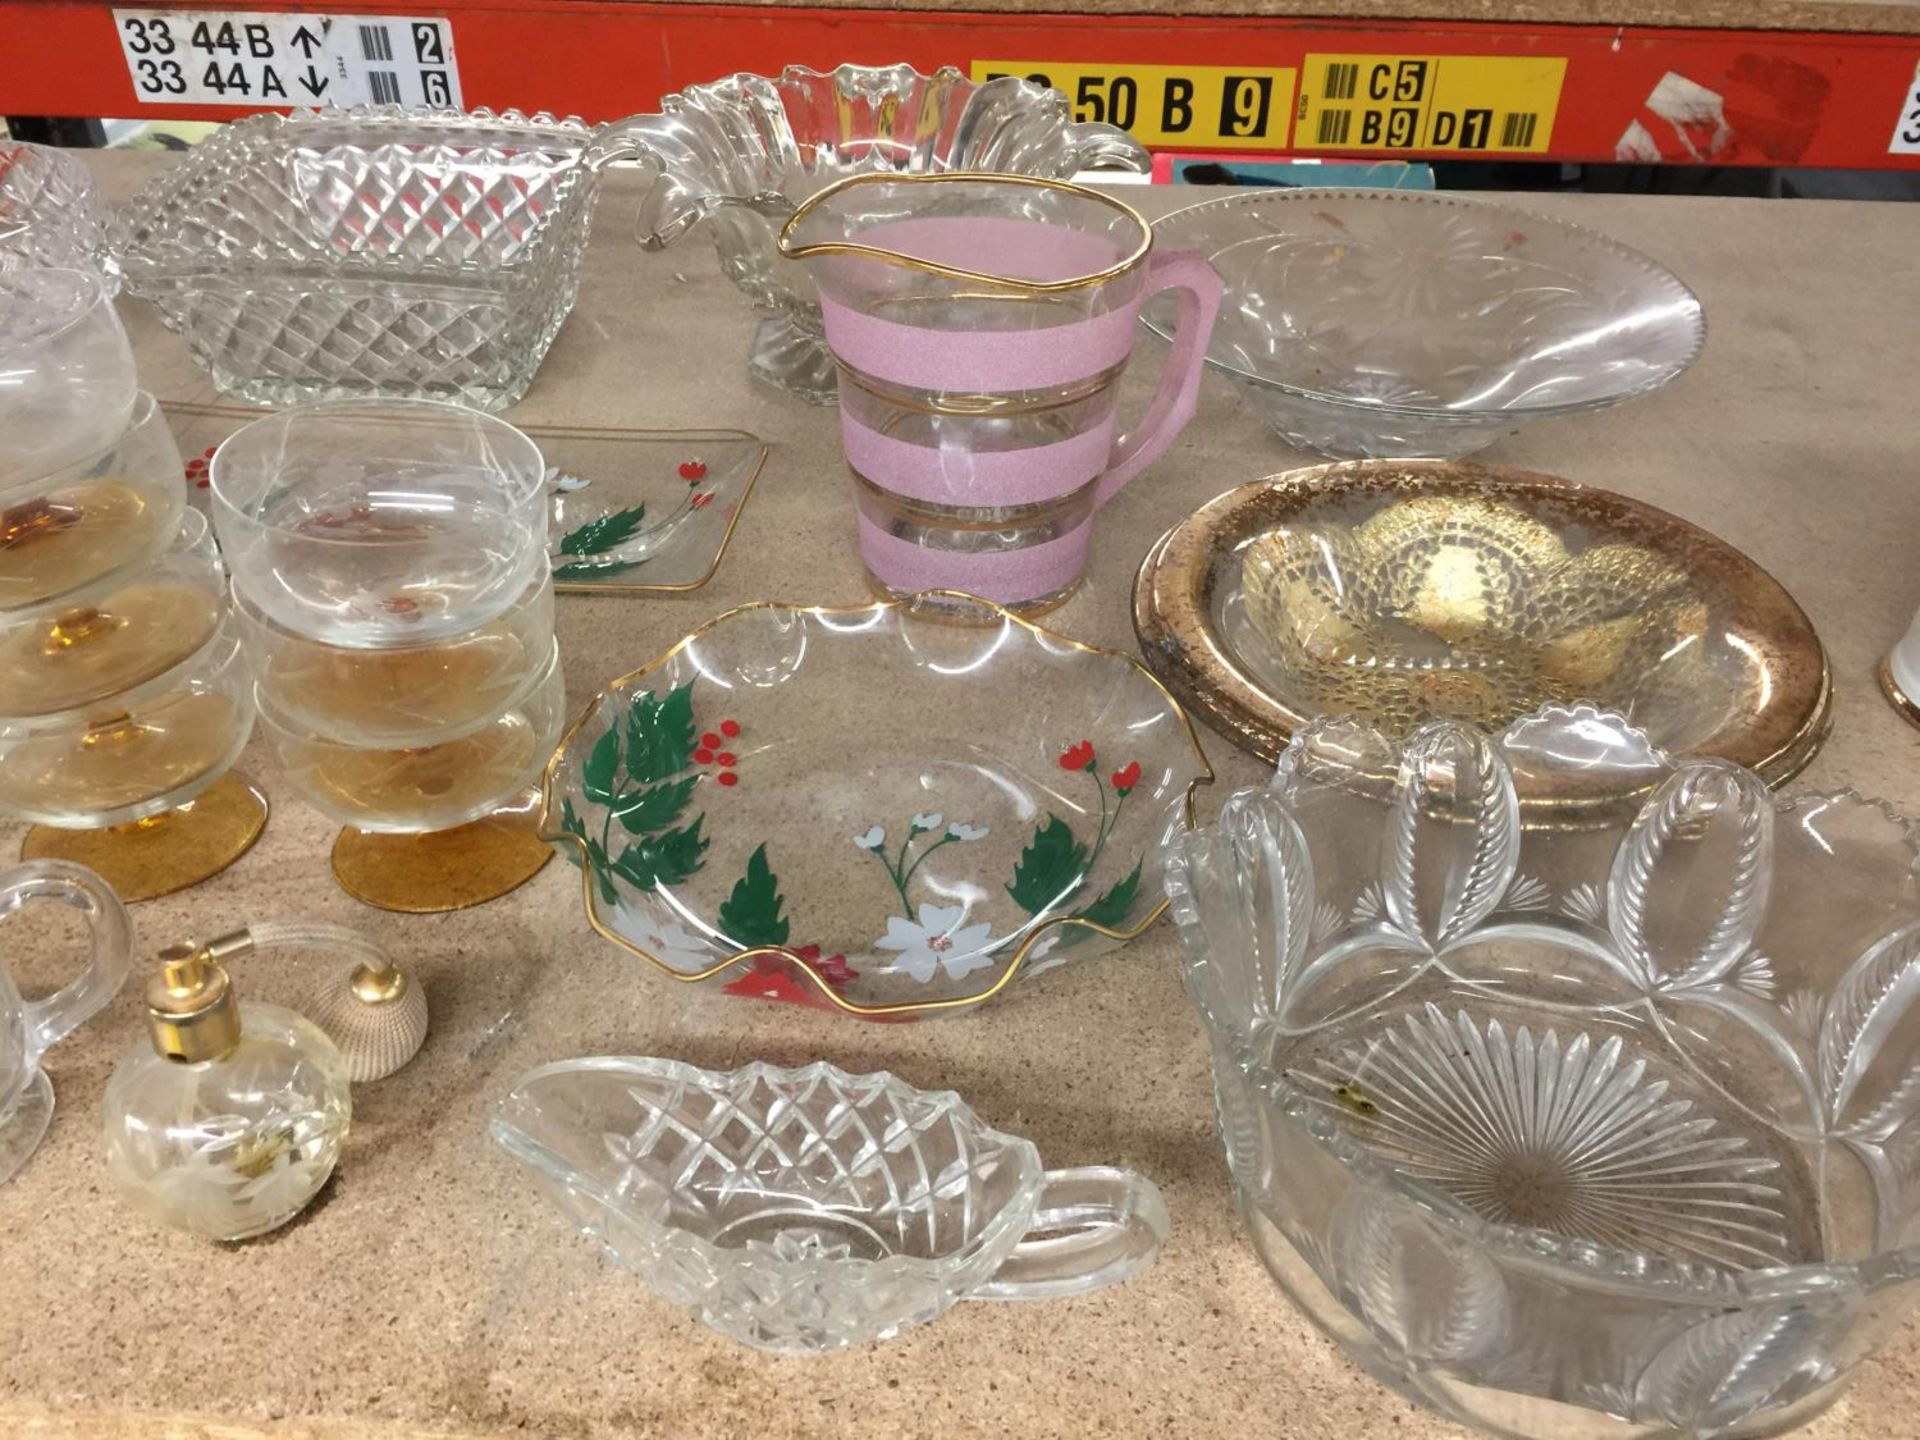 A LARGE AMOUNT OF GLASSWARE TO INCLUDE BOWLS, JUGS, SCENT BOTTLE, PLATES, ETC - Image 2 of 5